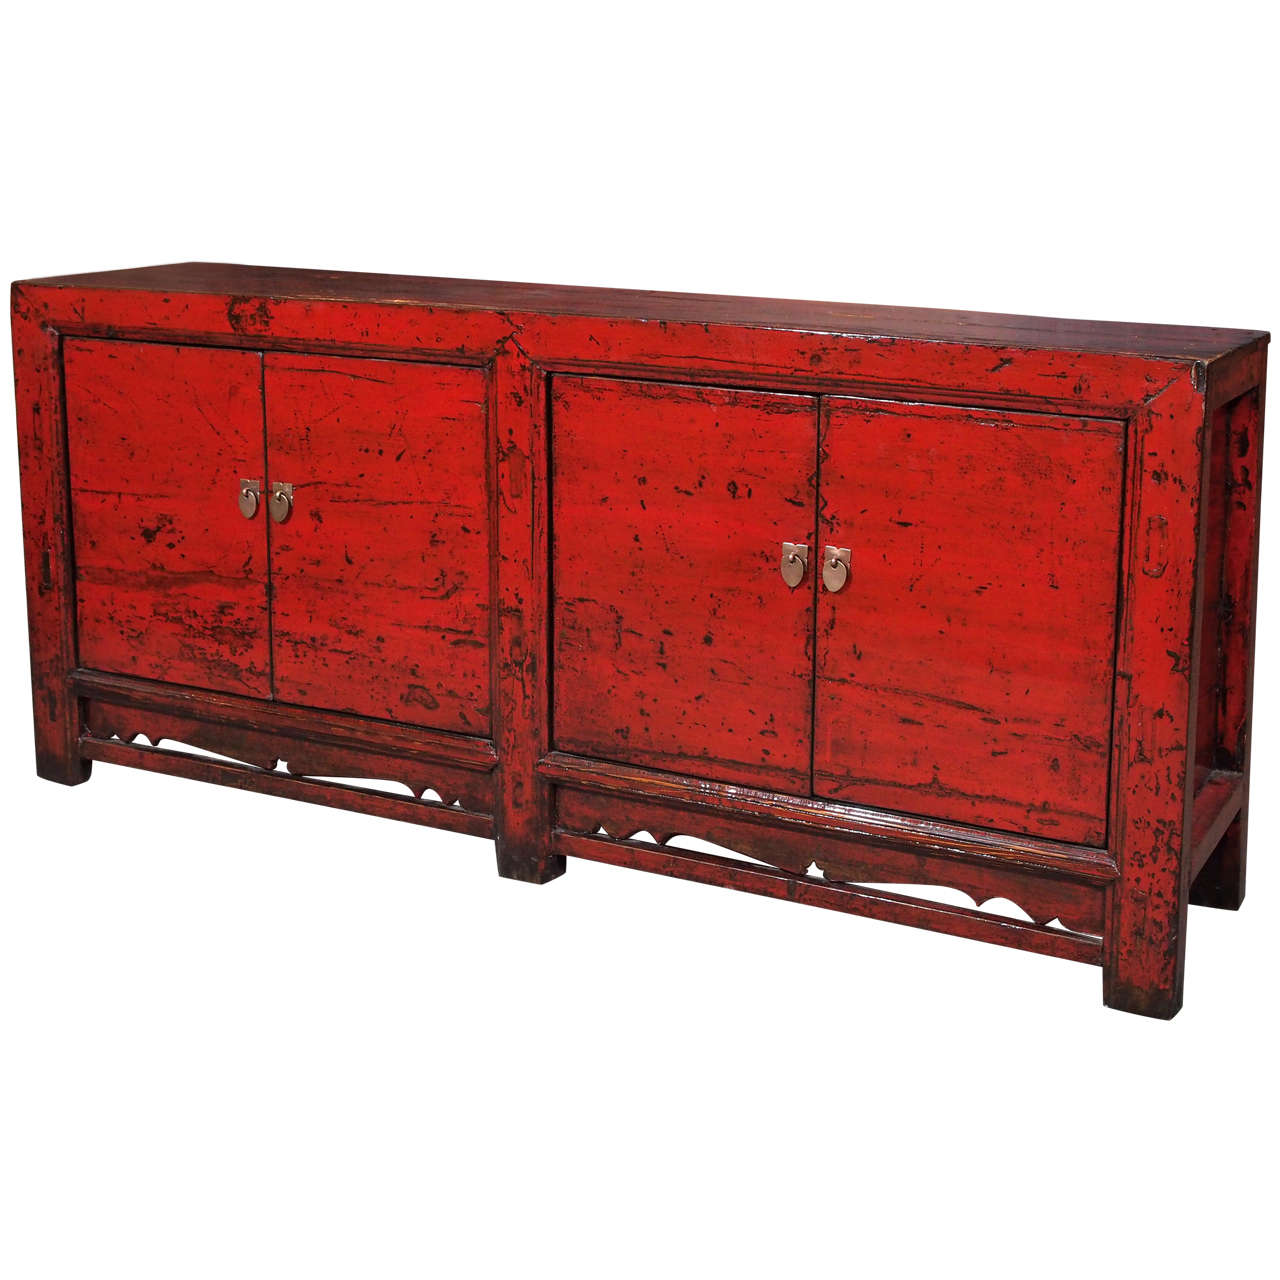 Antique Chinese Red Lacquer Four-Door Sideboard